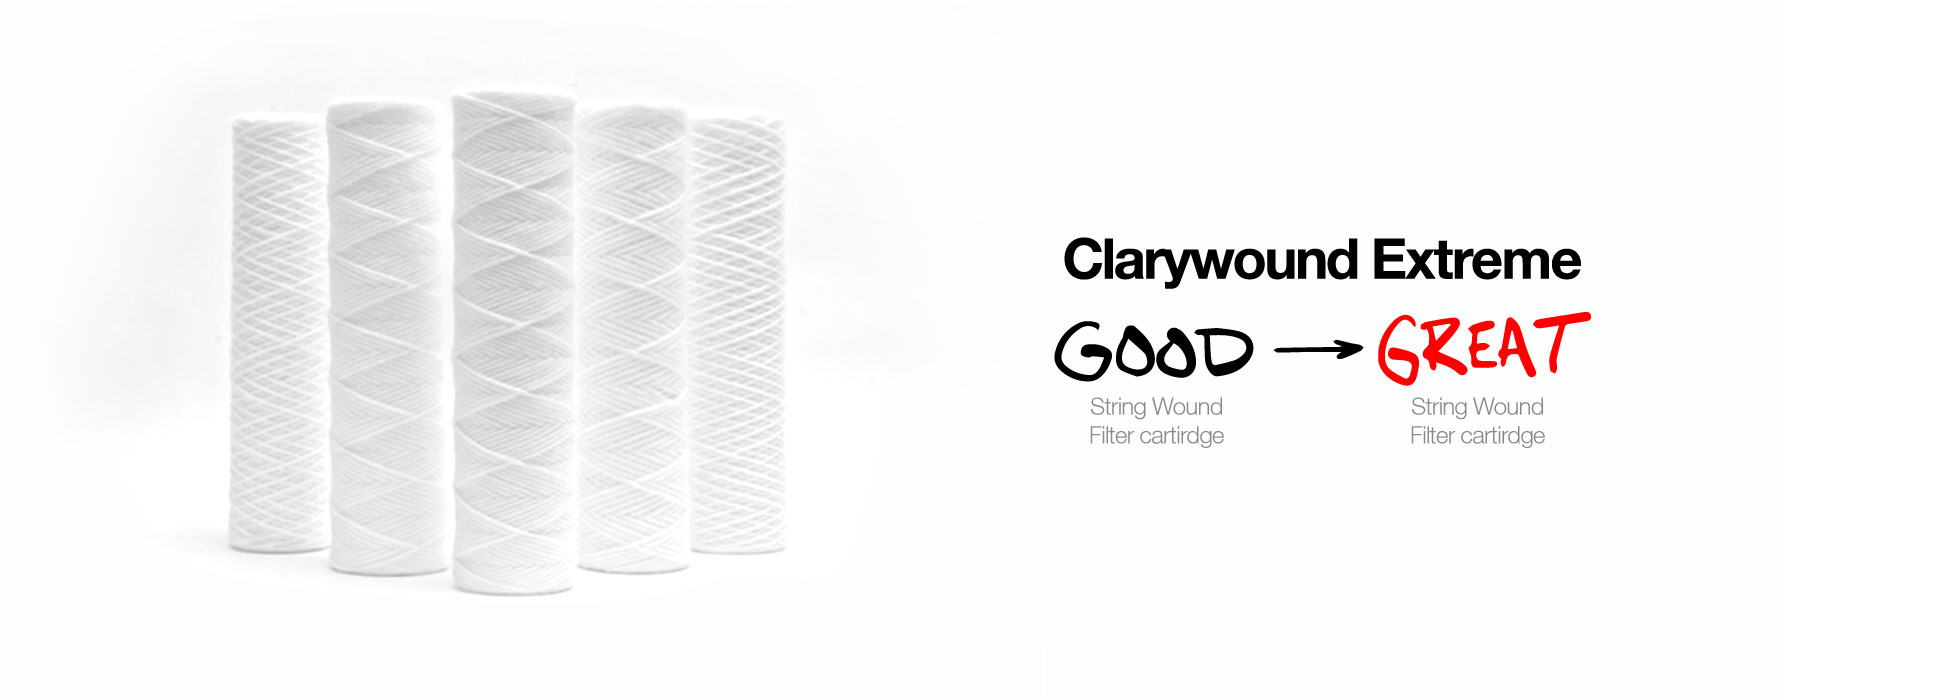 Clarywound Extreme String wound Filter cartridge